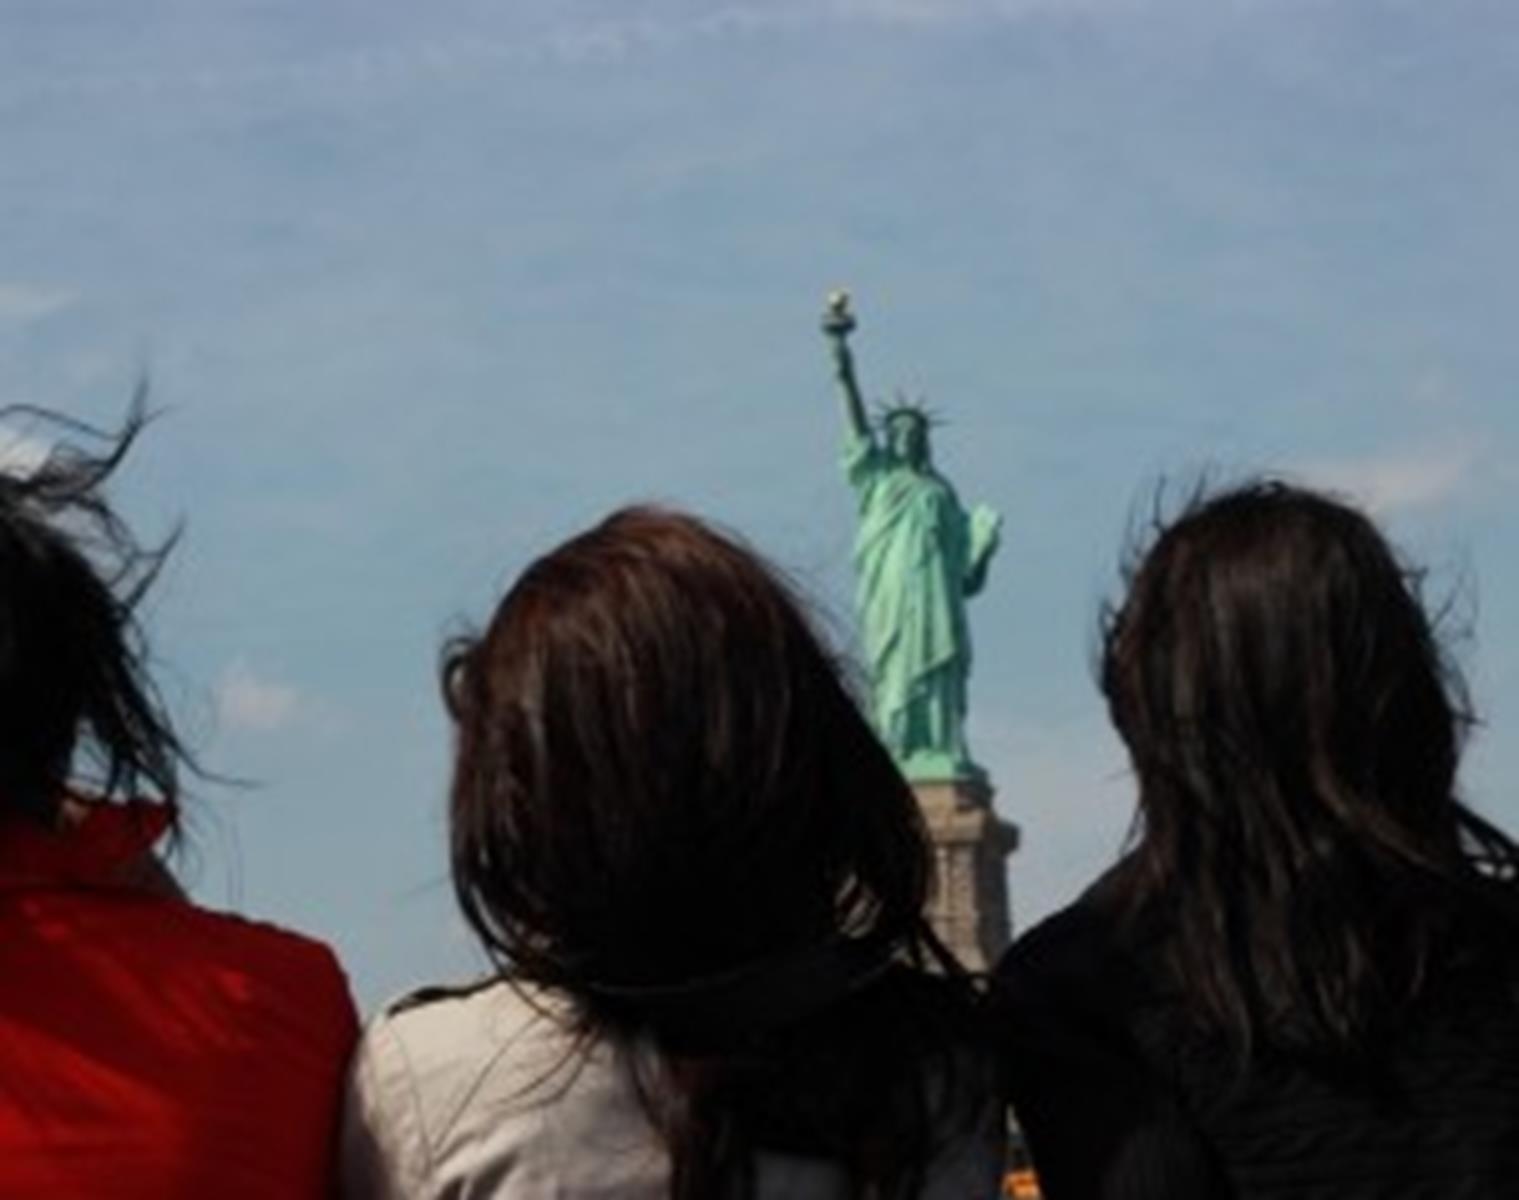 Each cruise stops in front of the Statue of Liberty for photos.